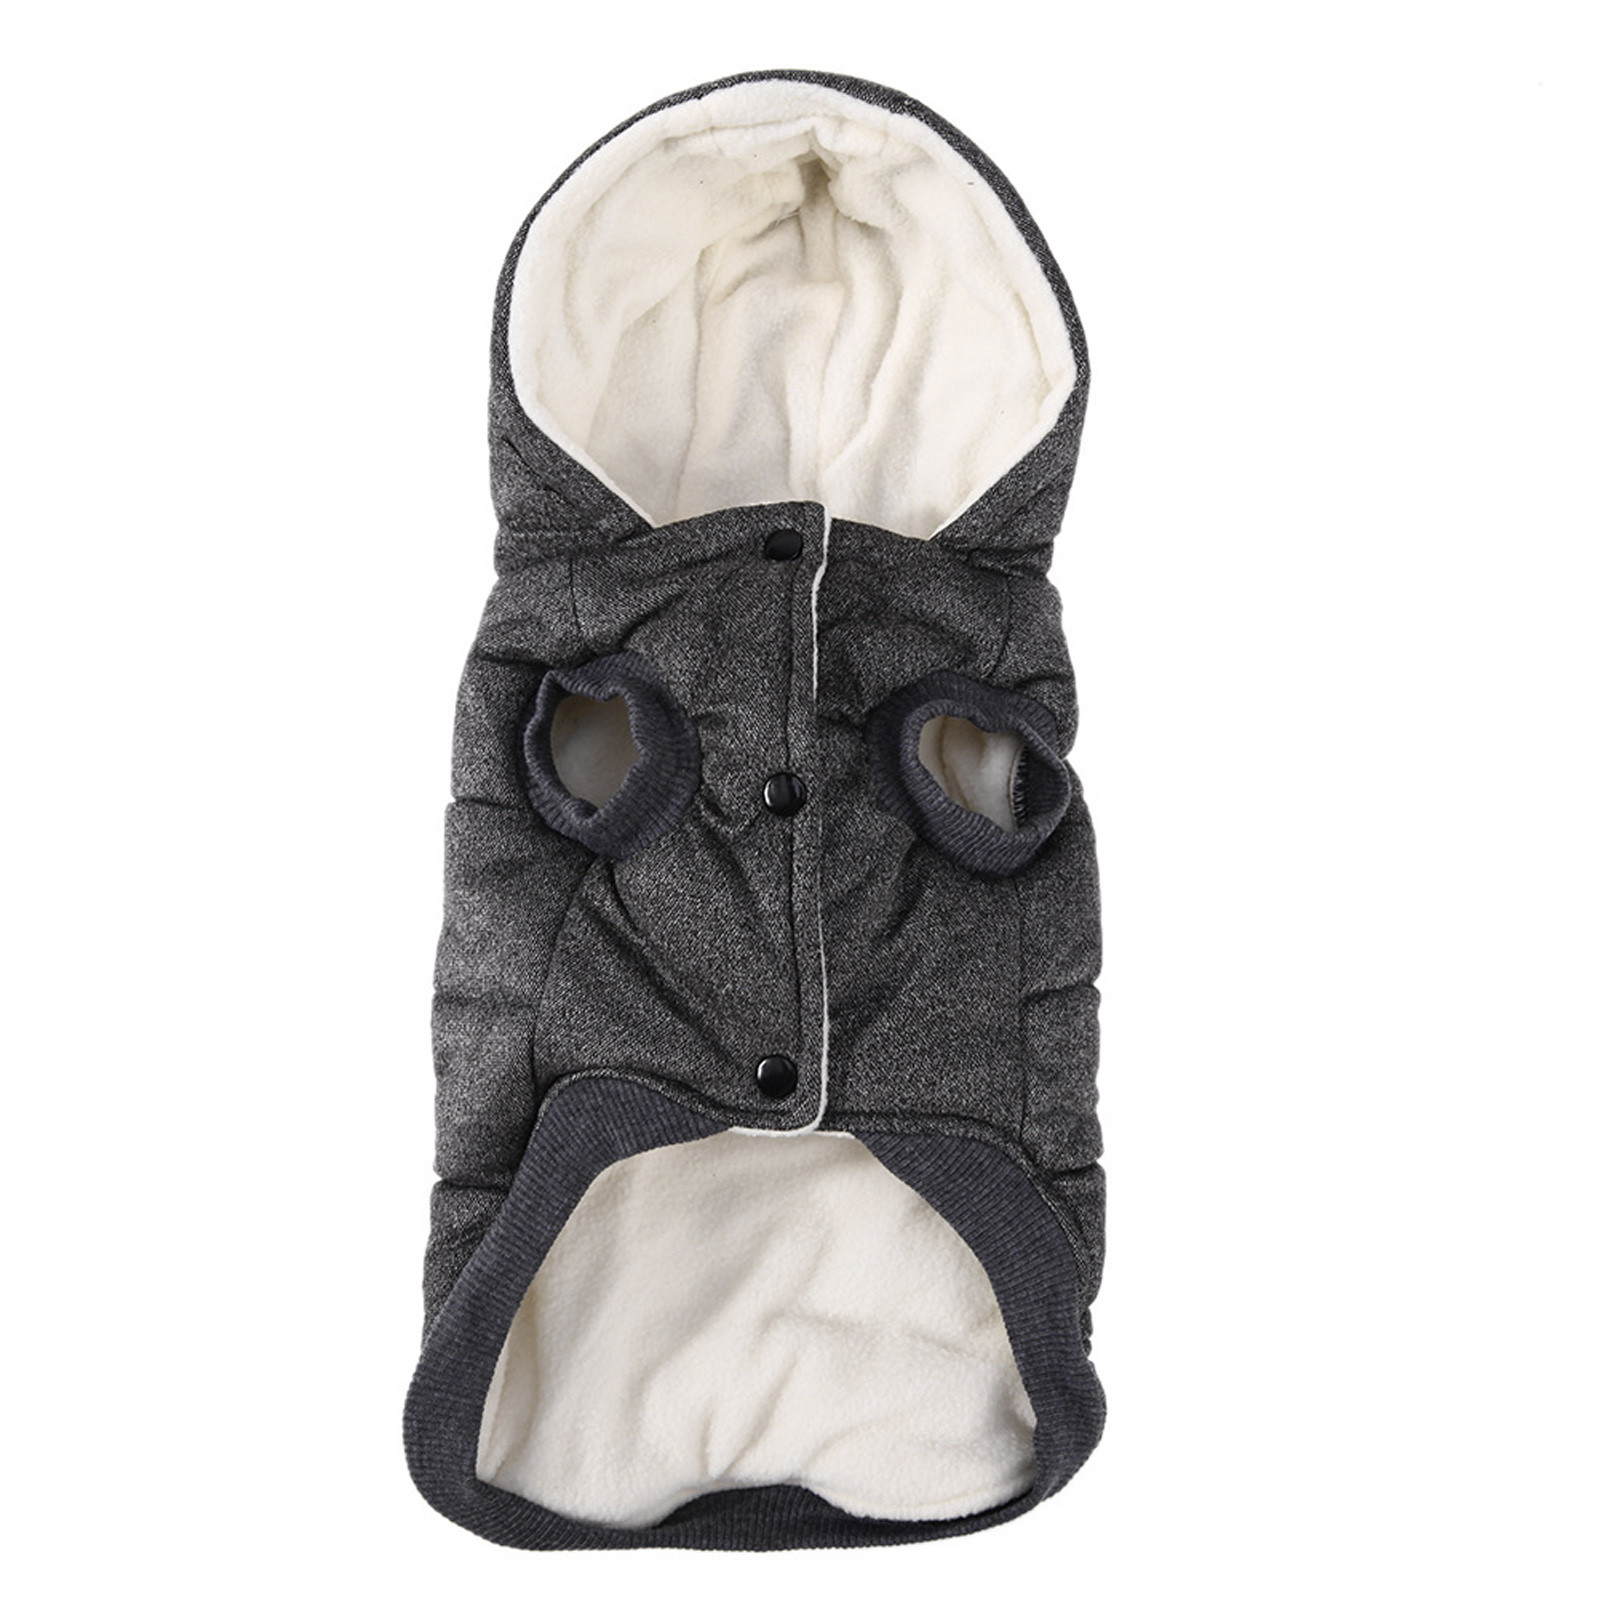 Jacket, Sweatshirt, Winter Down Jacket, Anumal Domestic Hooded Coat, Warm Clothes For Large Medium Dogs (L (Chest: 44cm, Neck: 29cm), Gray) - image 2 of 3